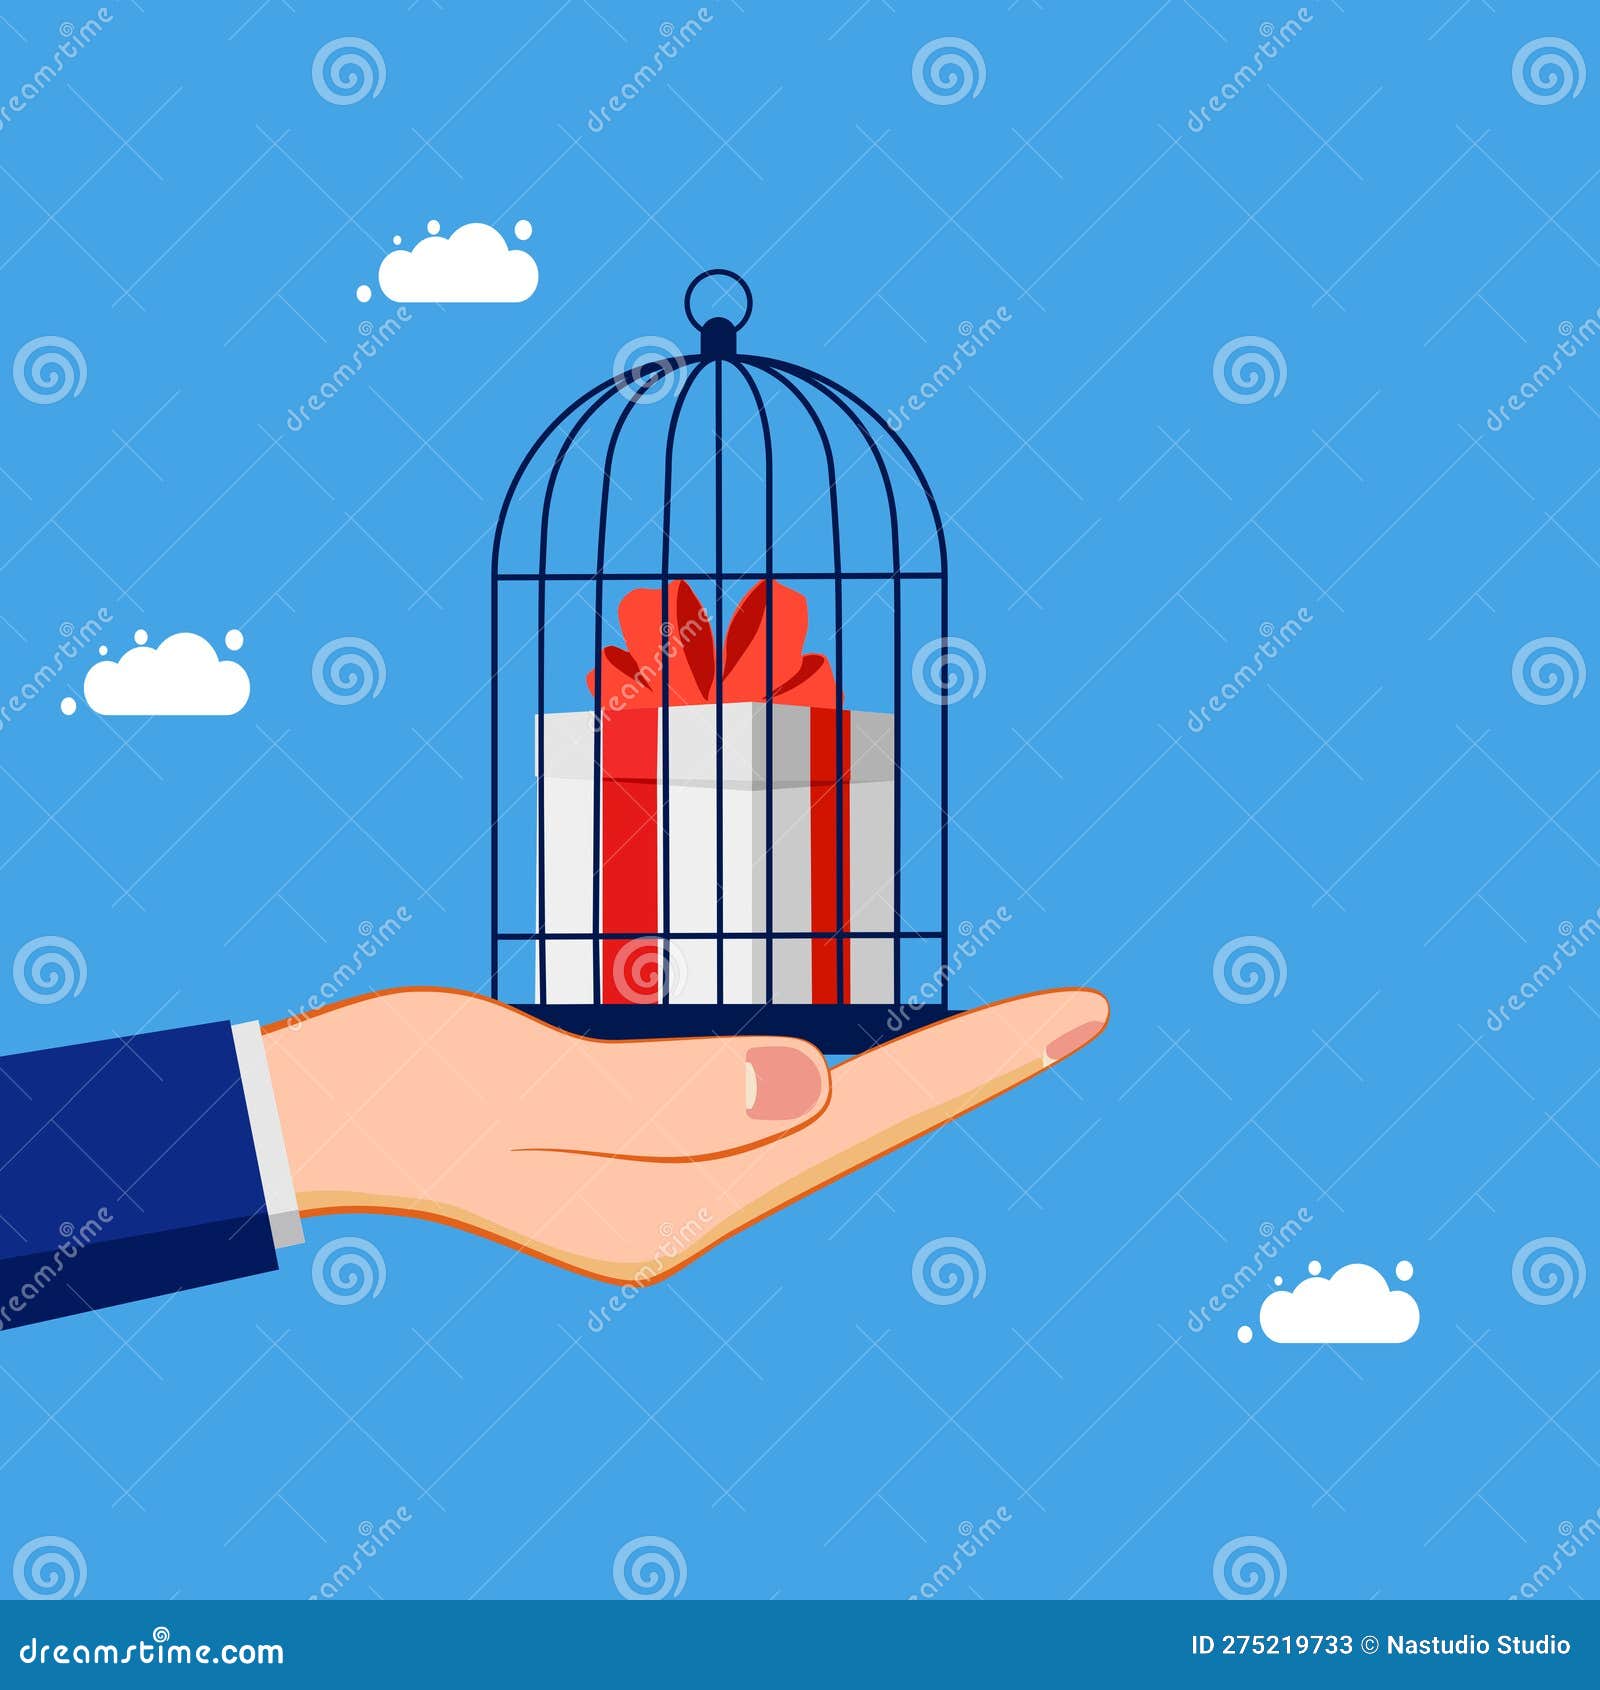 reward trap. confine or lock the gift box in the birdcage. business and investment concept